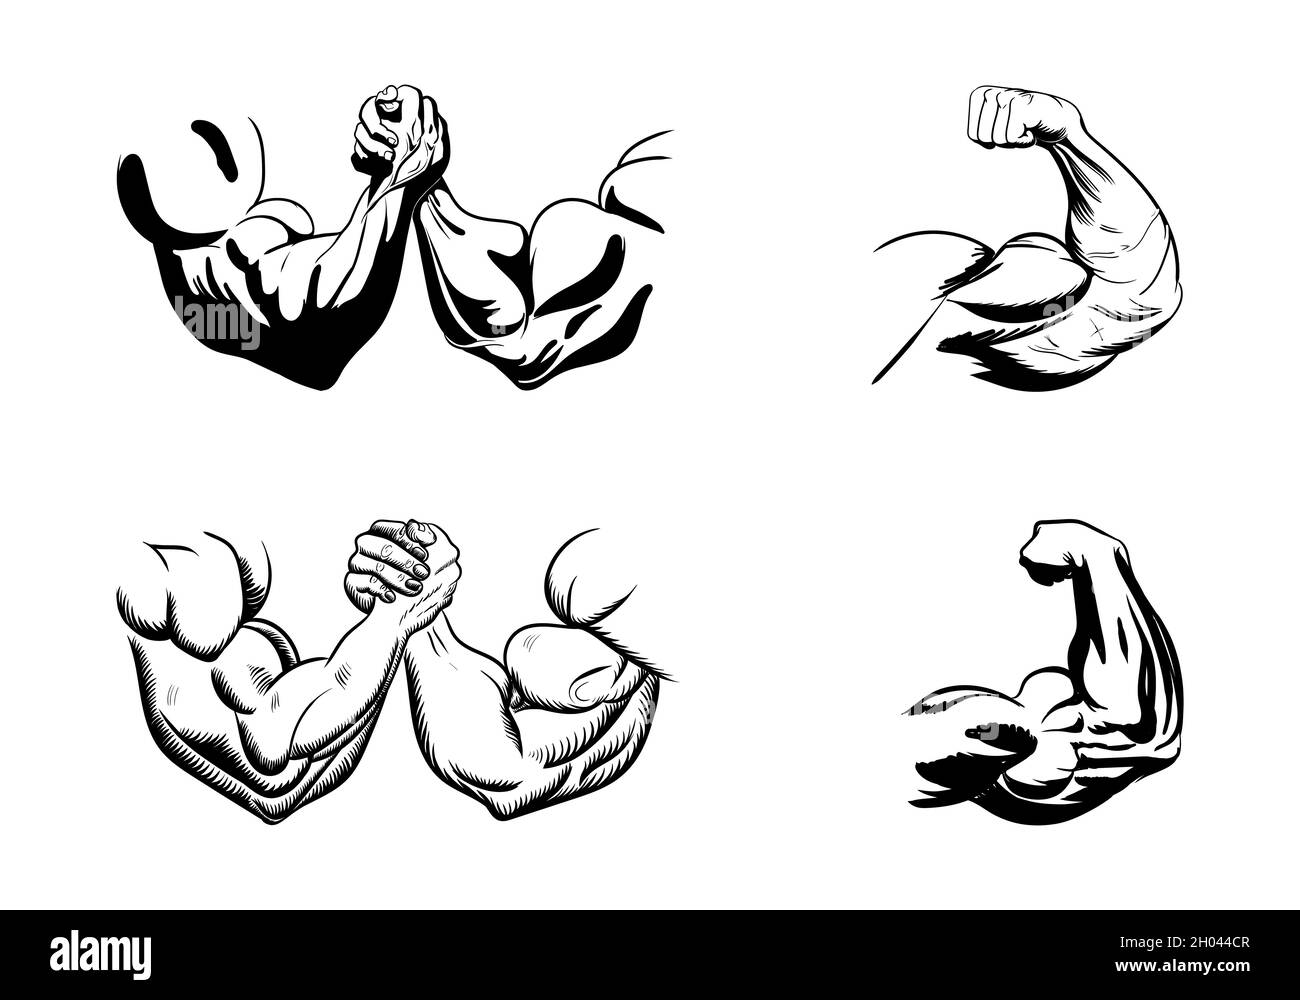 https://c8.alamy.com/comp/2H044CR/powerful-hand-muscle-strong-arm-muscles-hard-biceps-and-hands-strength-outline-muscular-logo-healthy-bodybuilding-bicep-badge-or-gym-logotype-iso-2H044CR.jpg